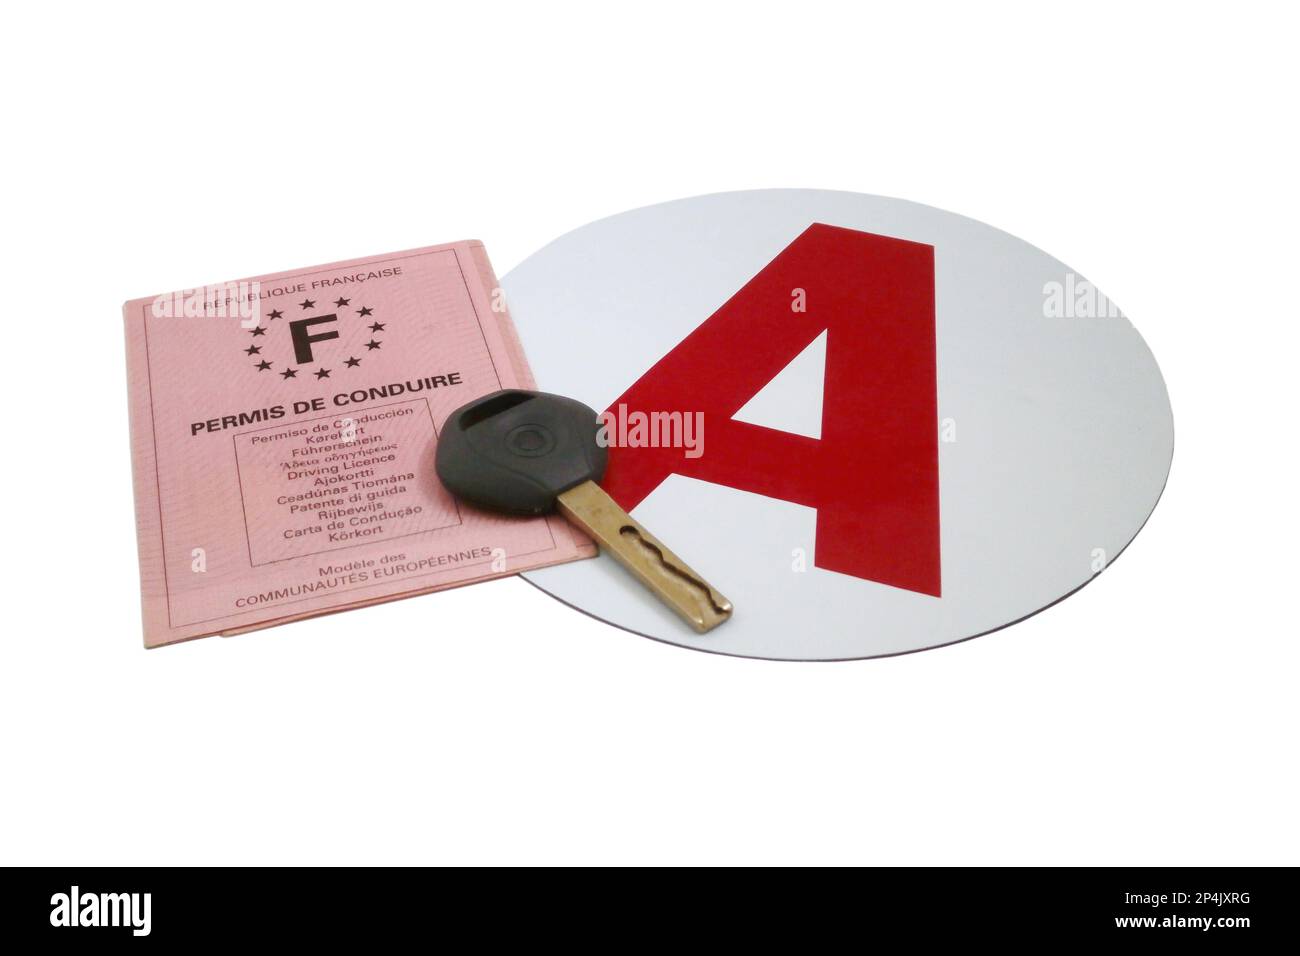 Studio shot of a set of French driver's license, with a car key and a magnetic A disk. Stock Photo